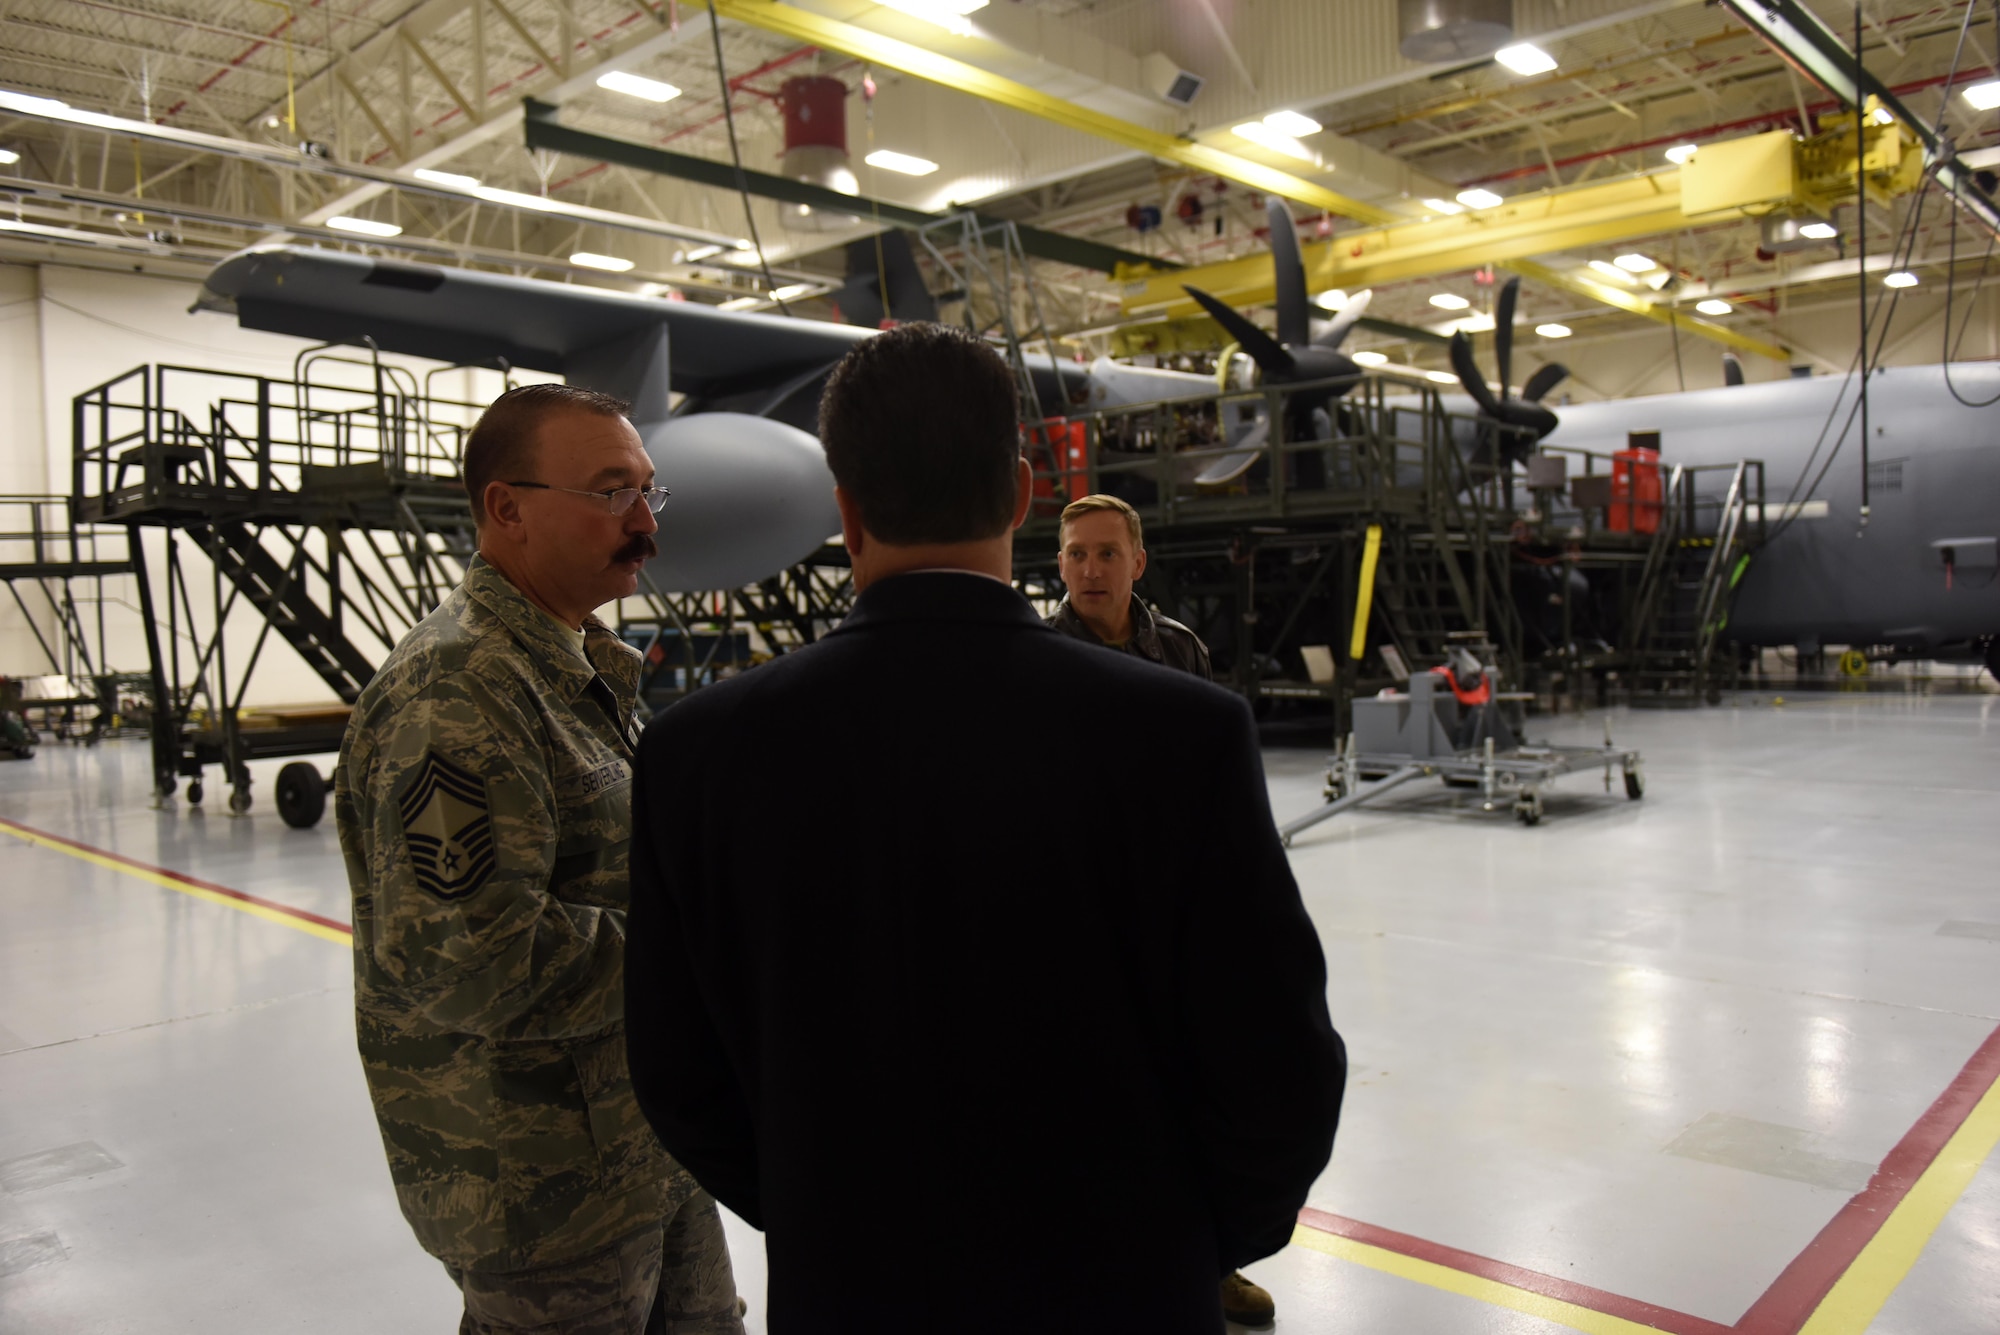 State Rep. Mehaffie presents citation to Airman, tours base